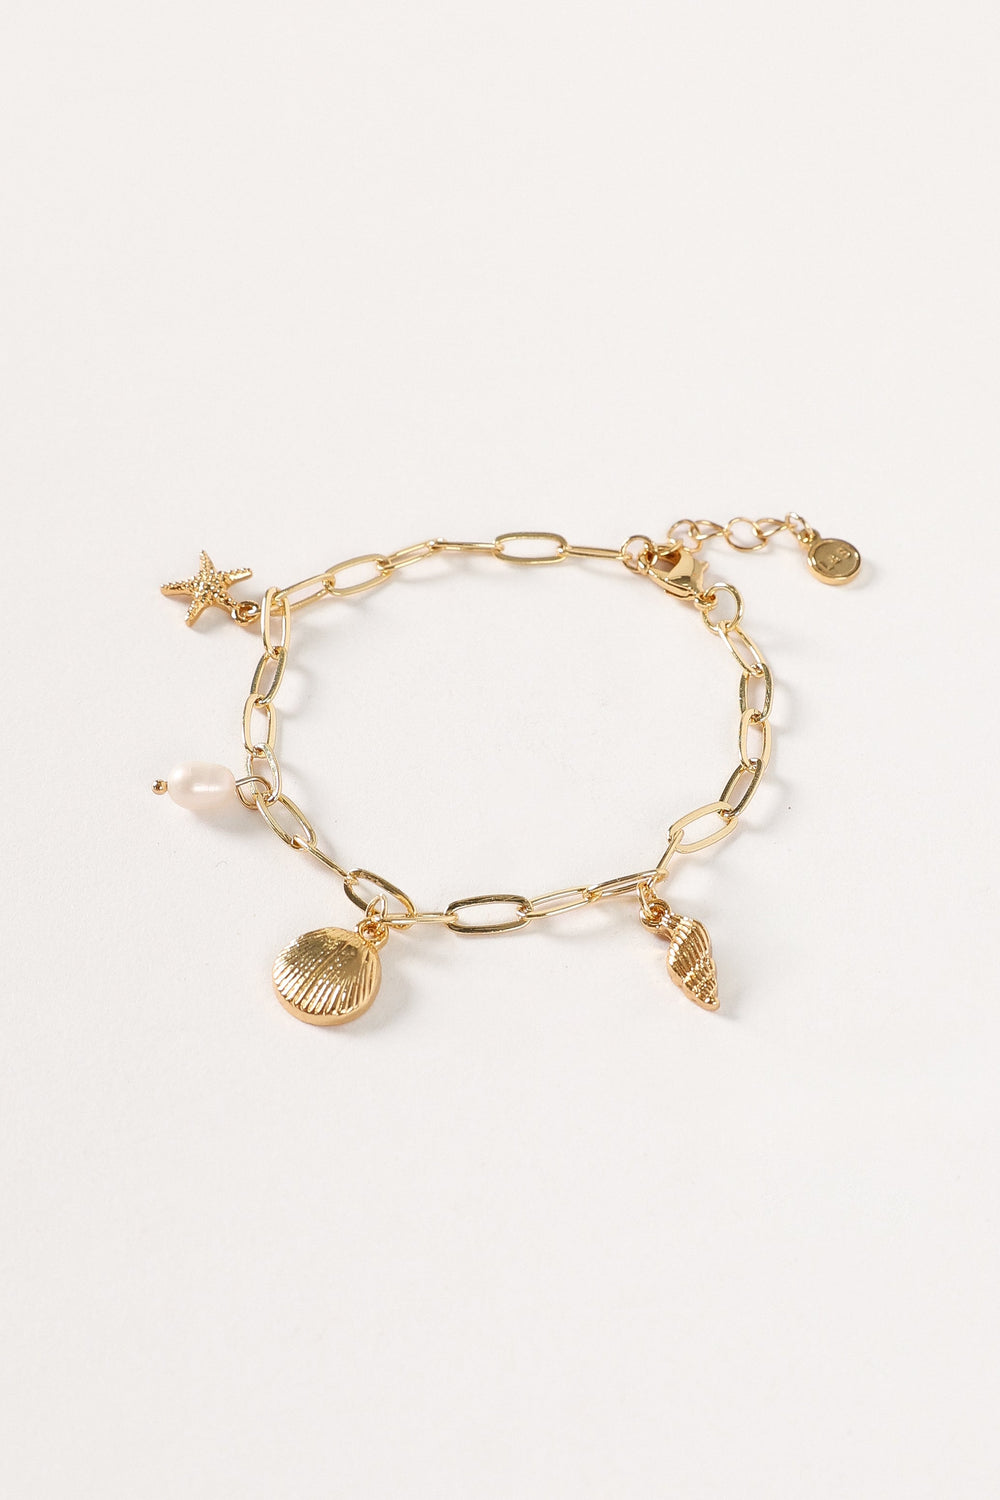 Petal and Pup USA ACCESSORIES Alice Charm Bracelet - Gold One Size